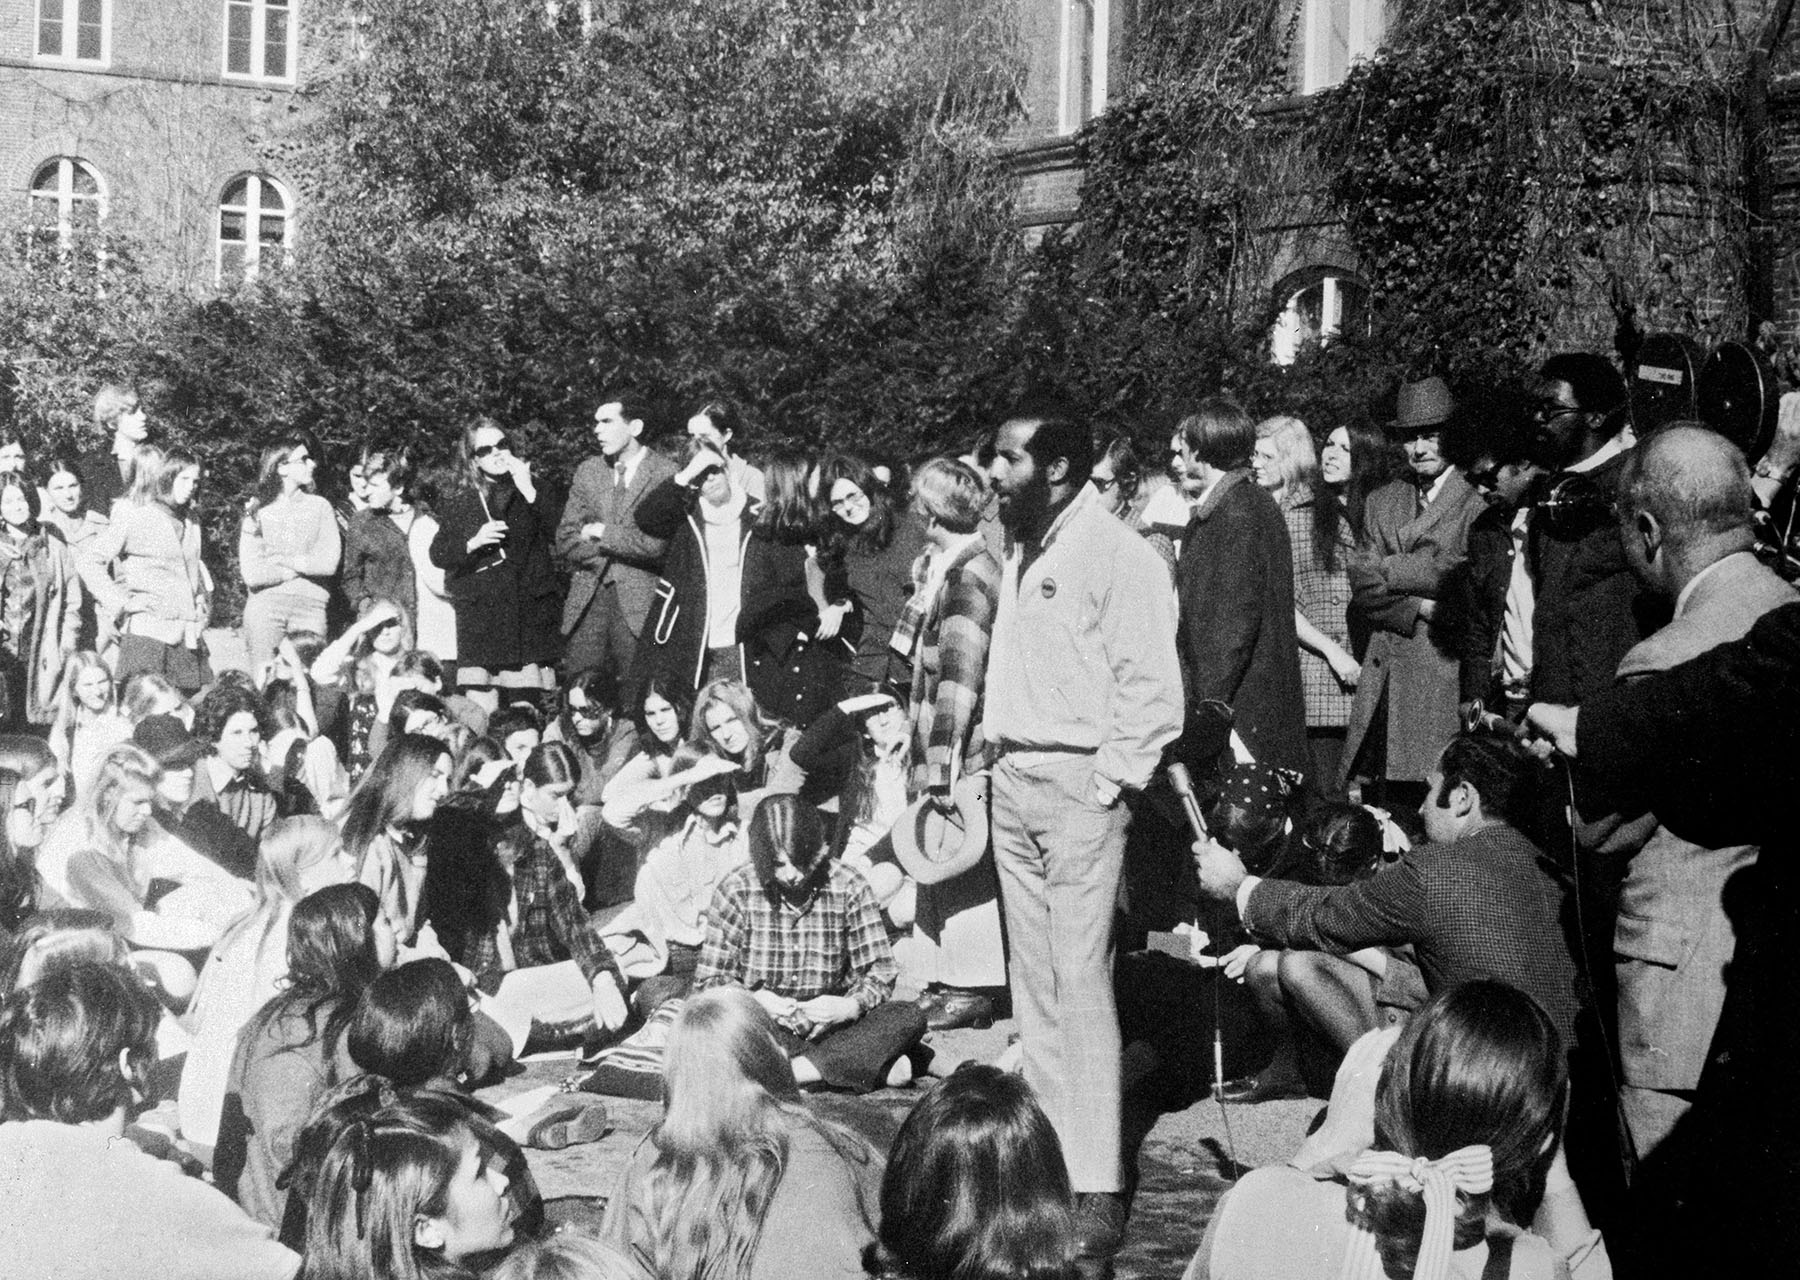 A very large group of people outside in front of a brick building (Main Building). Some people are sitting while some are standing. Prominently, there is a man in the center speaking or possibly yelling.